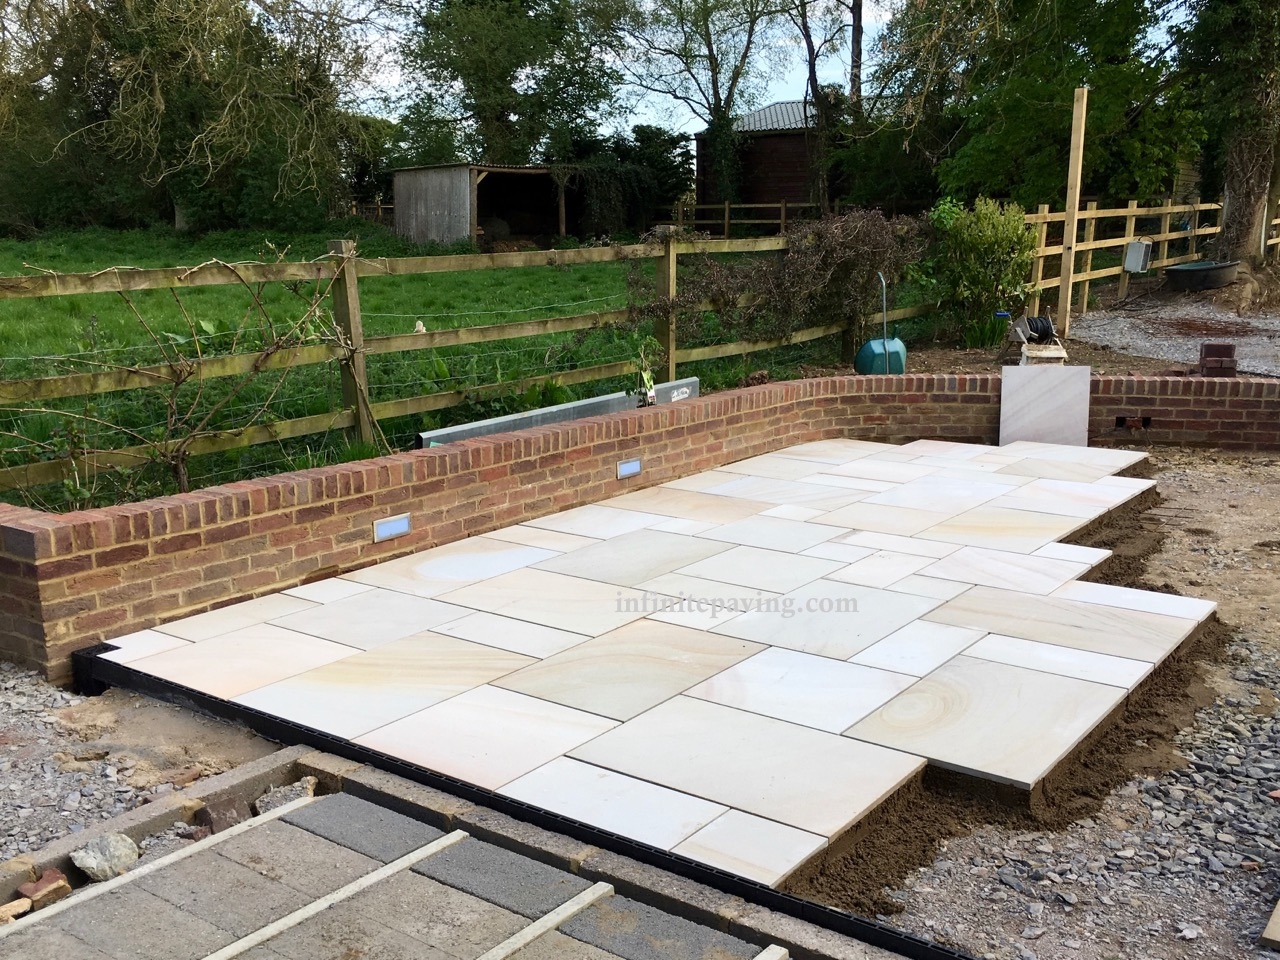 Sawn Camel Dust Honed 600x600mm Paving Stone Pack 22mm 15m² – Indian Sandstone – £29 Per M² – Infinite Paving